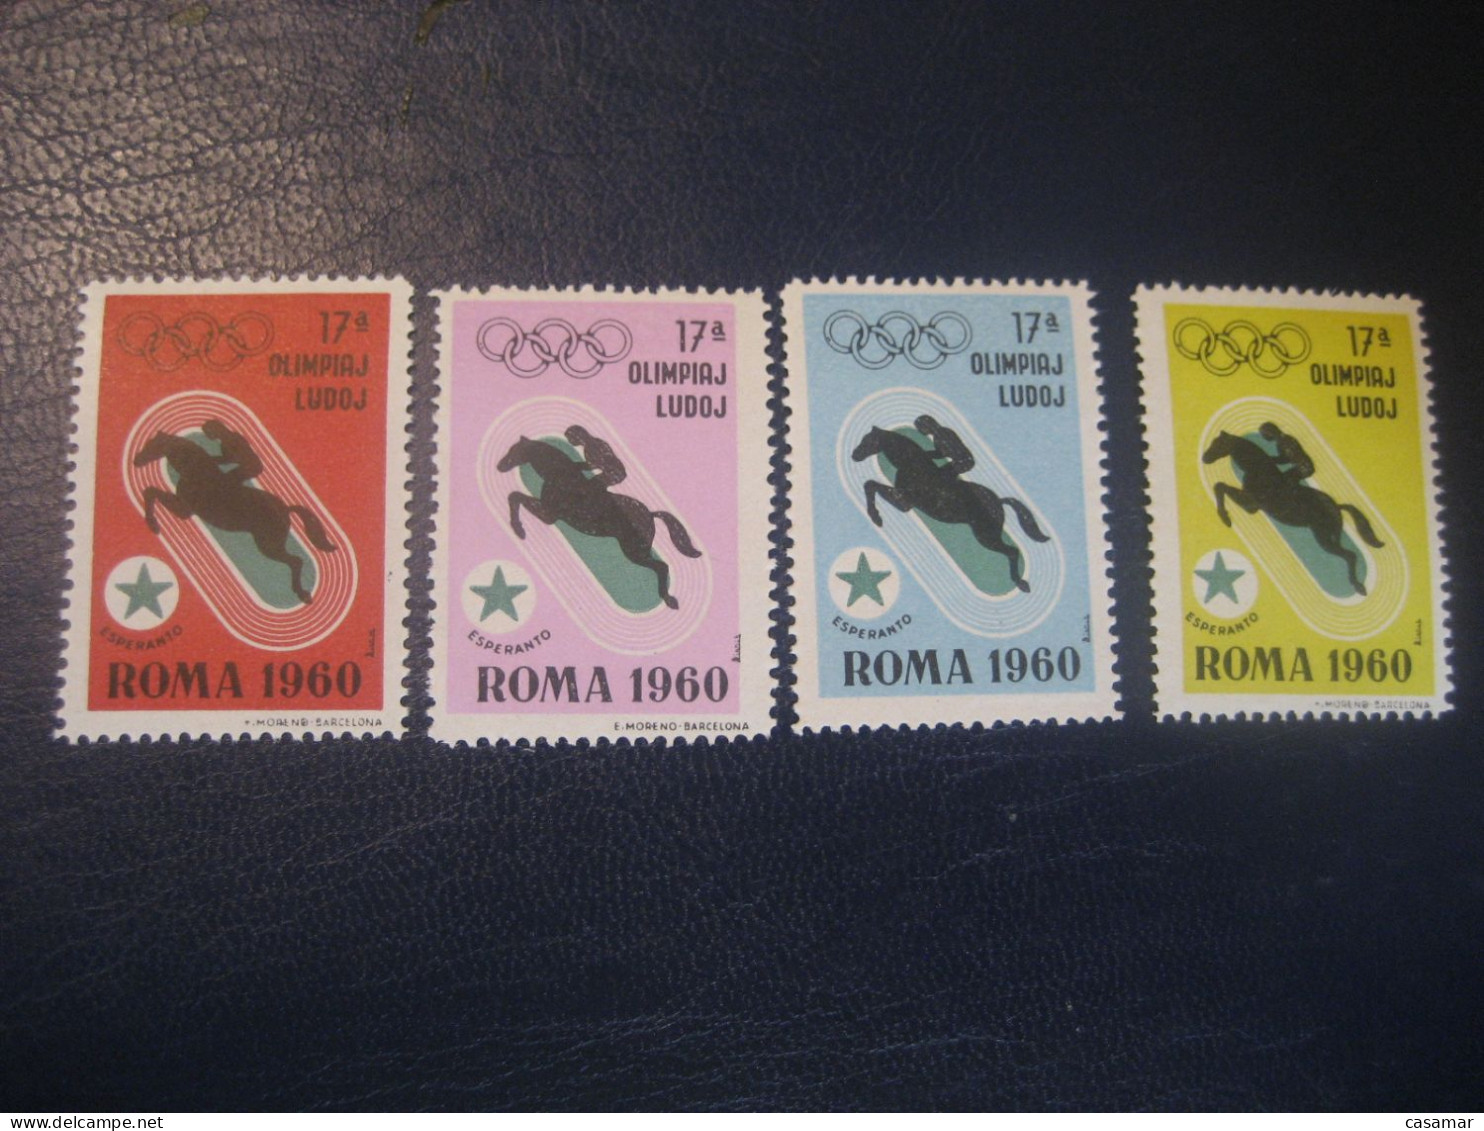 ROMA 1960 Equestrian Equitation Horse Olympic Games Olympics Esperanto 4 Poster Stamp Vignette ITALY Spain Label - Paardensport